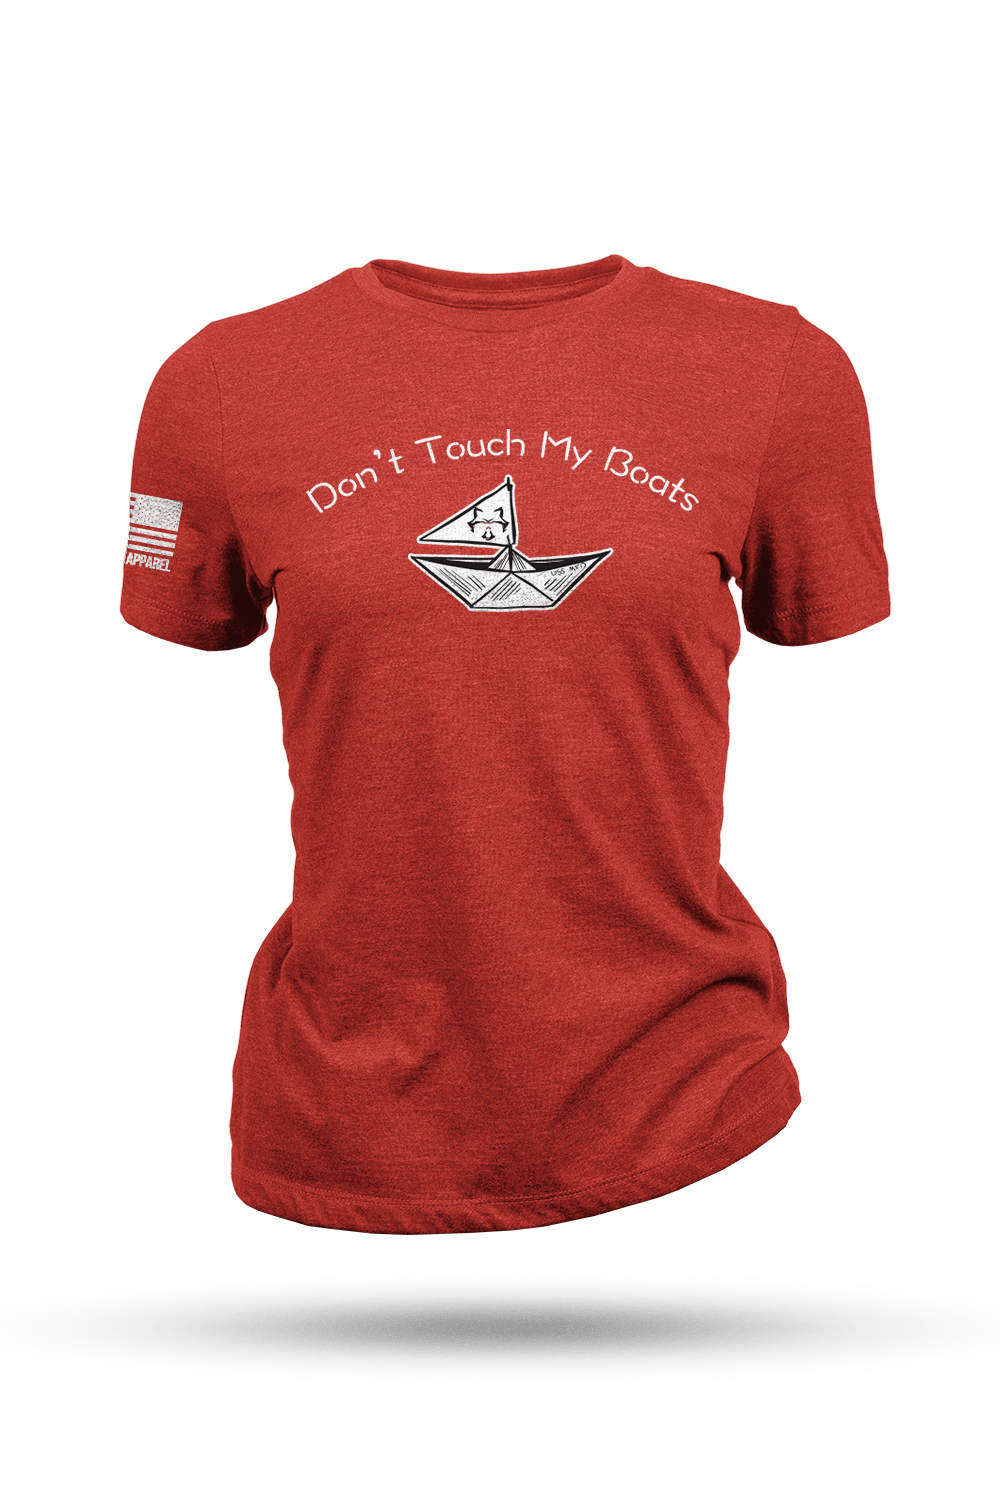 Women's T-Shirt - Don't touch my boats